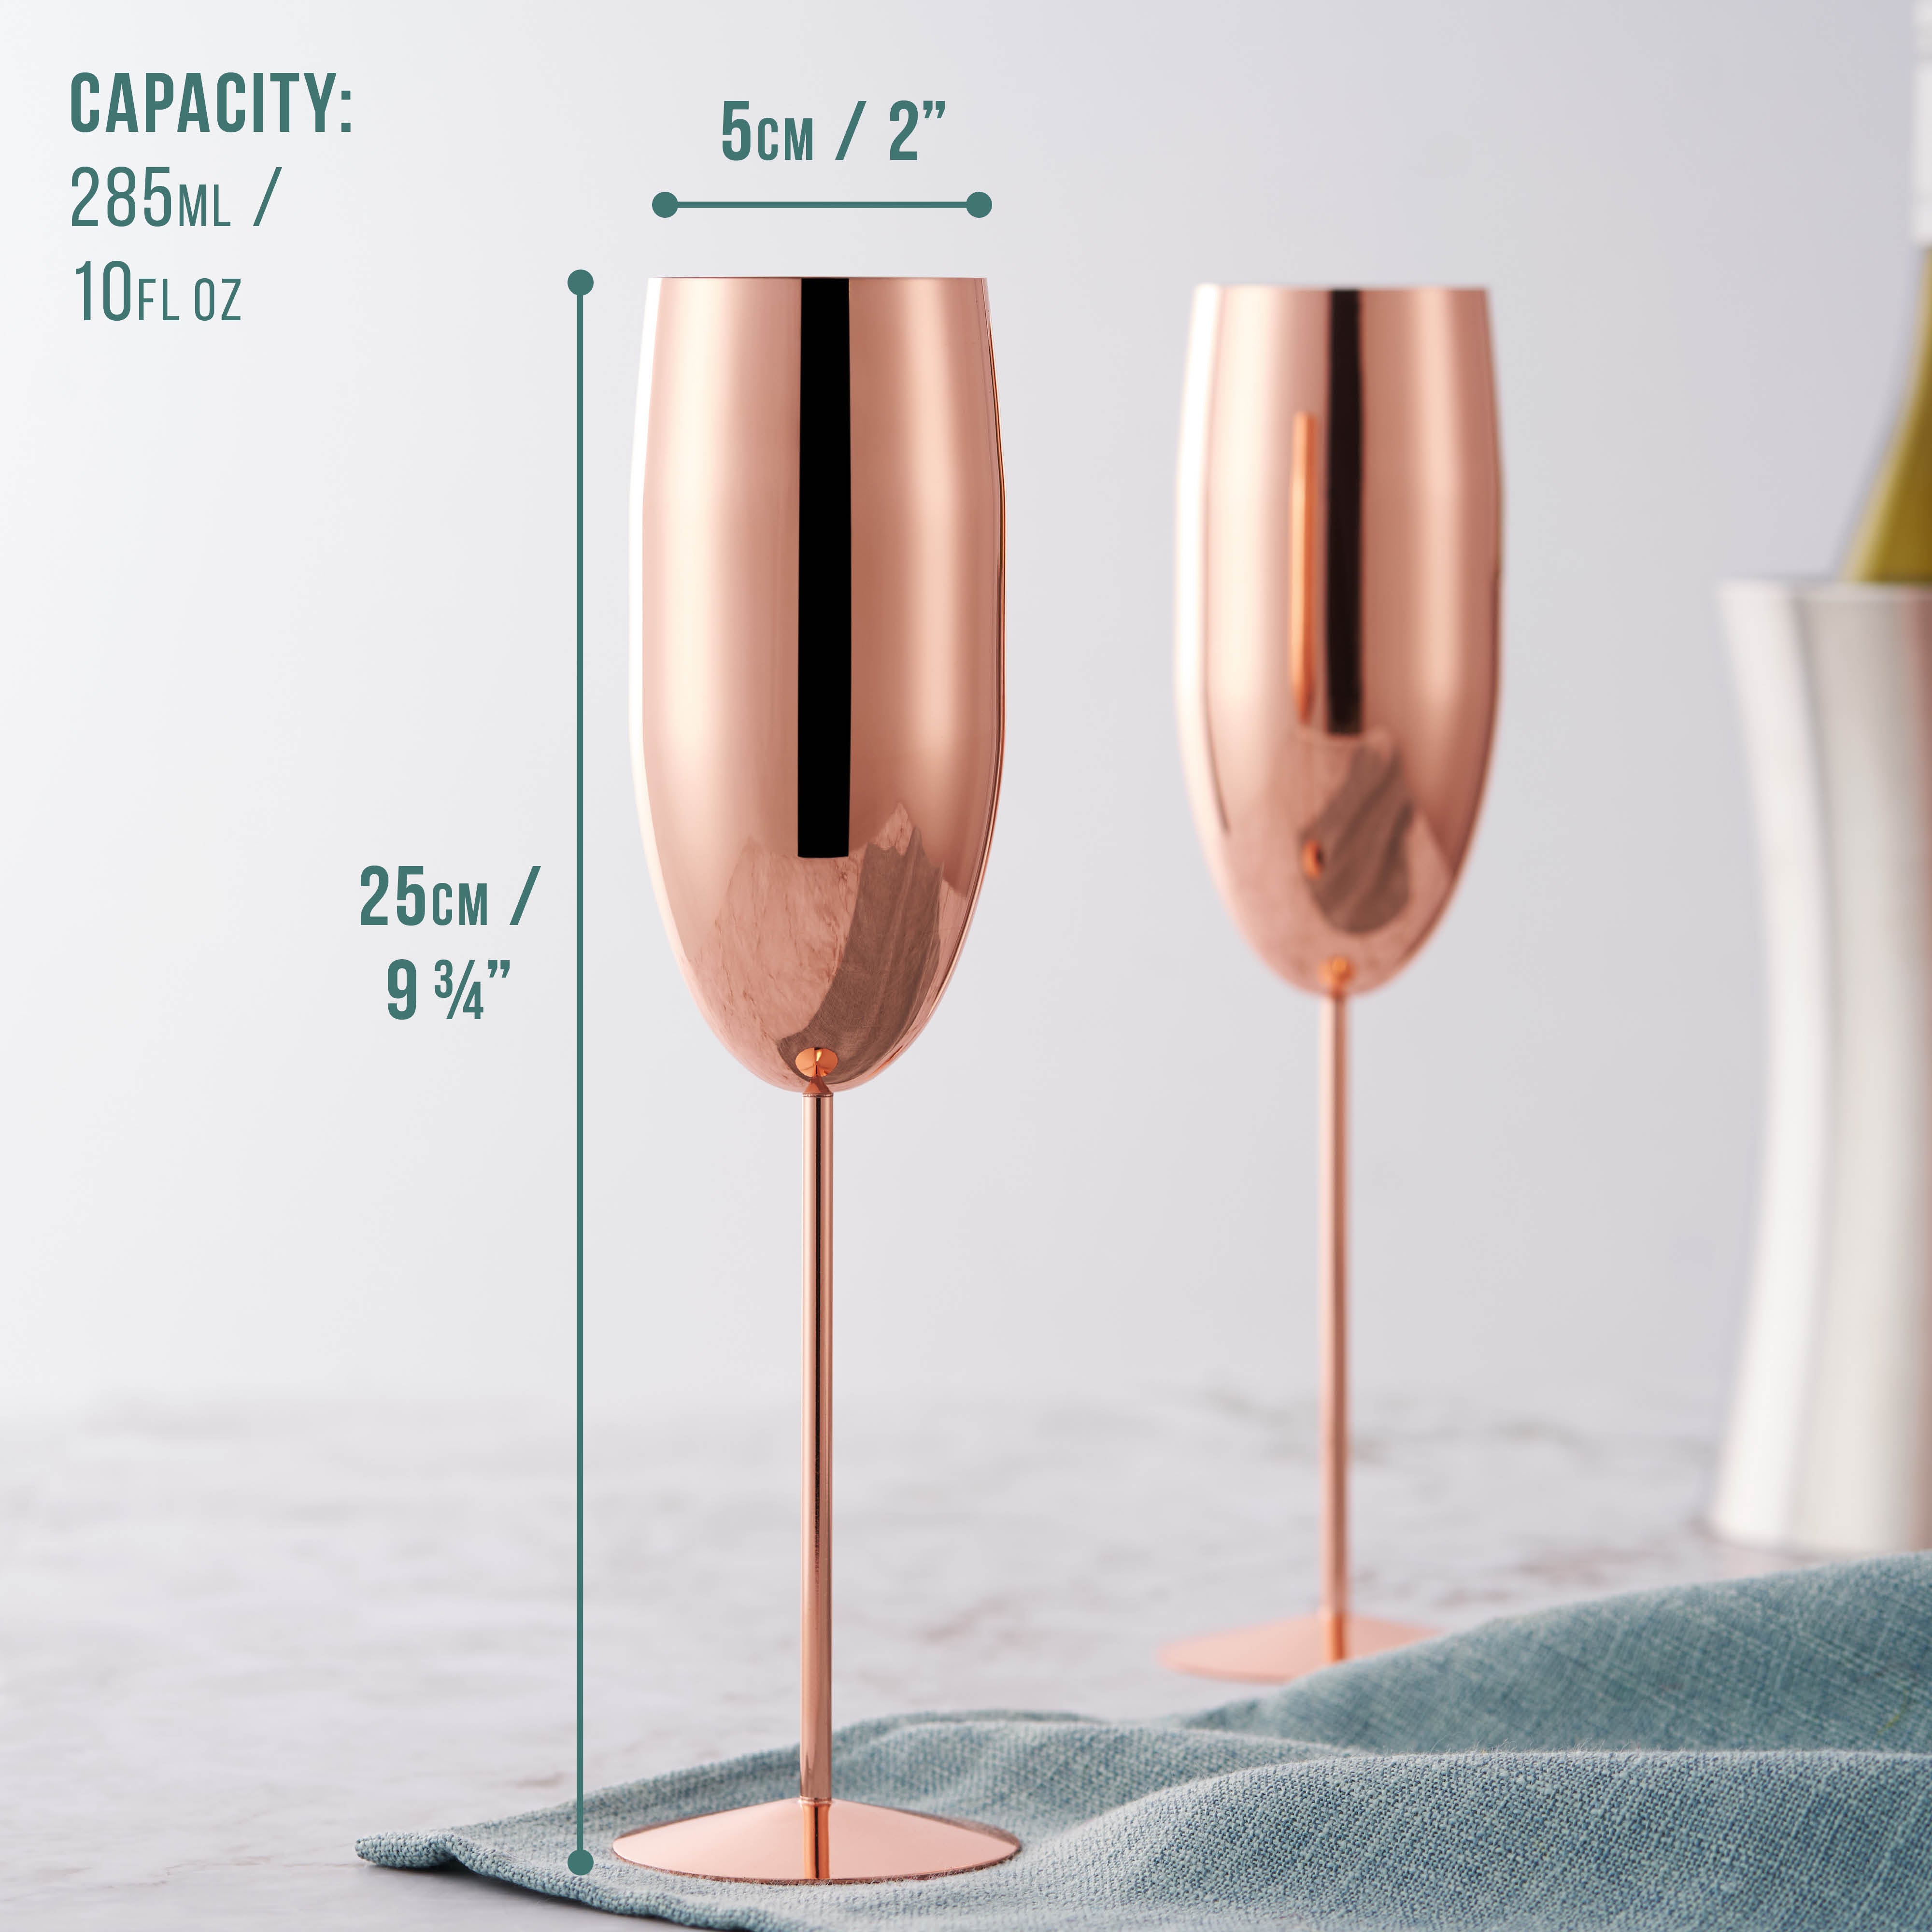 2 Rose Gold Stainless Steel Champagne Flutes